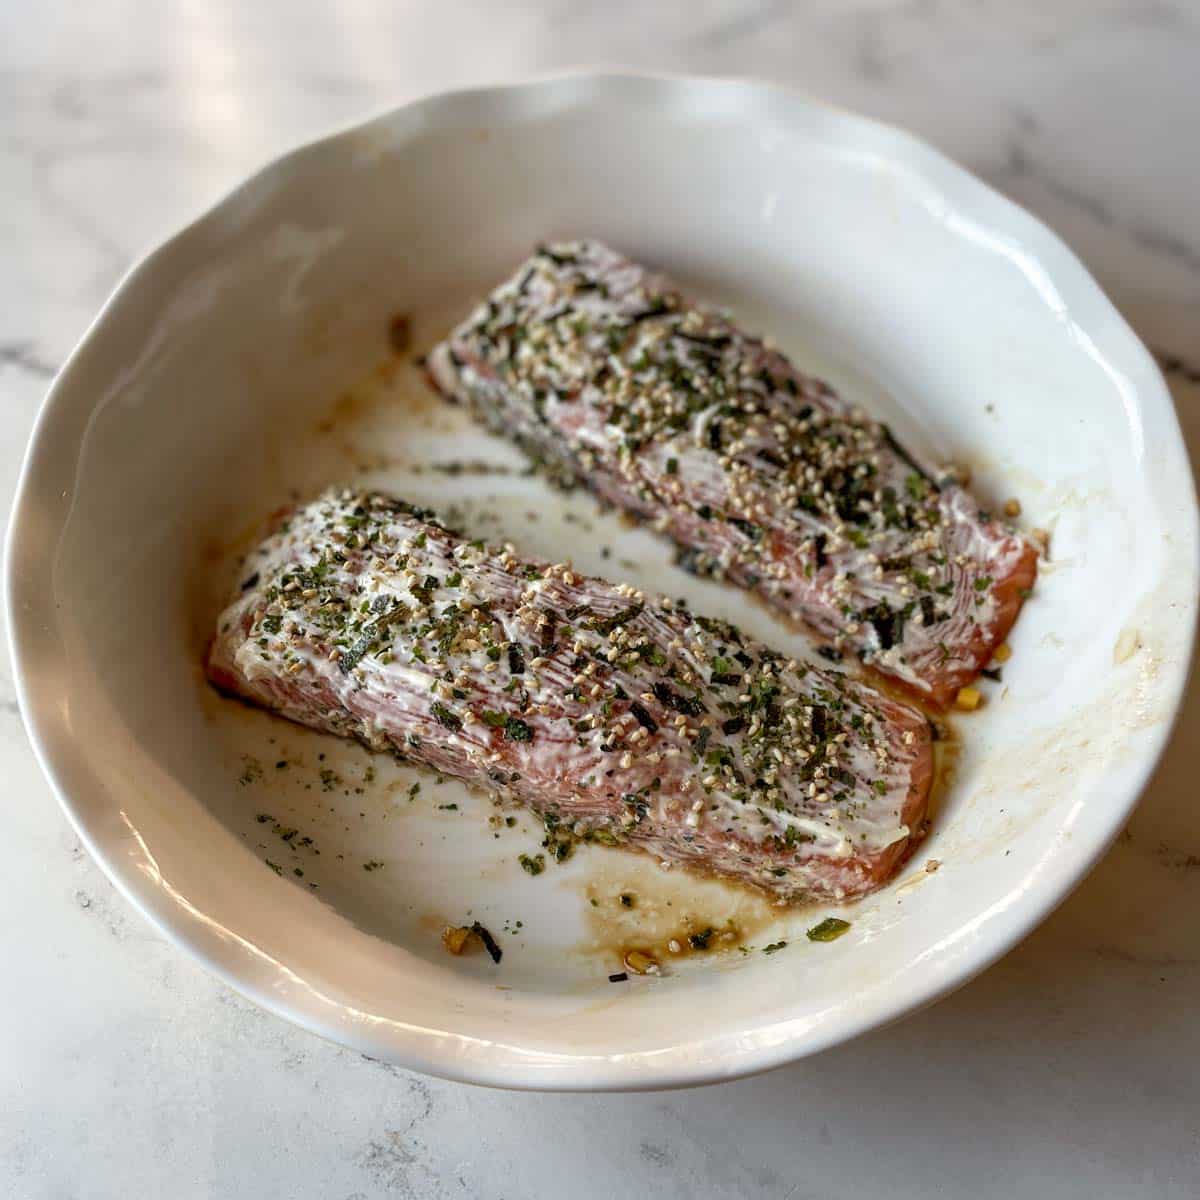 Salmon fillets are brushed with mayonnaise and sprinkled with furikake.